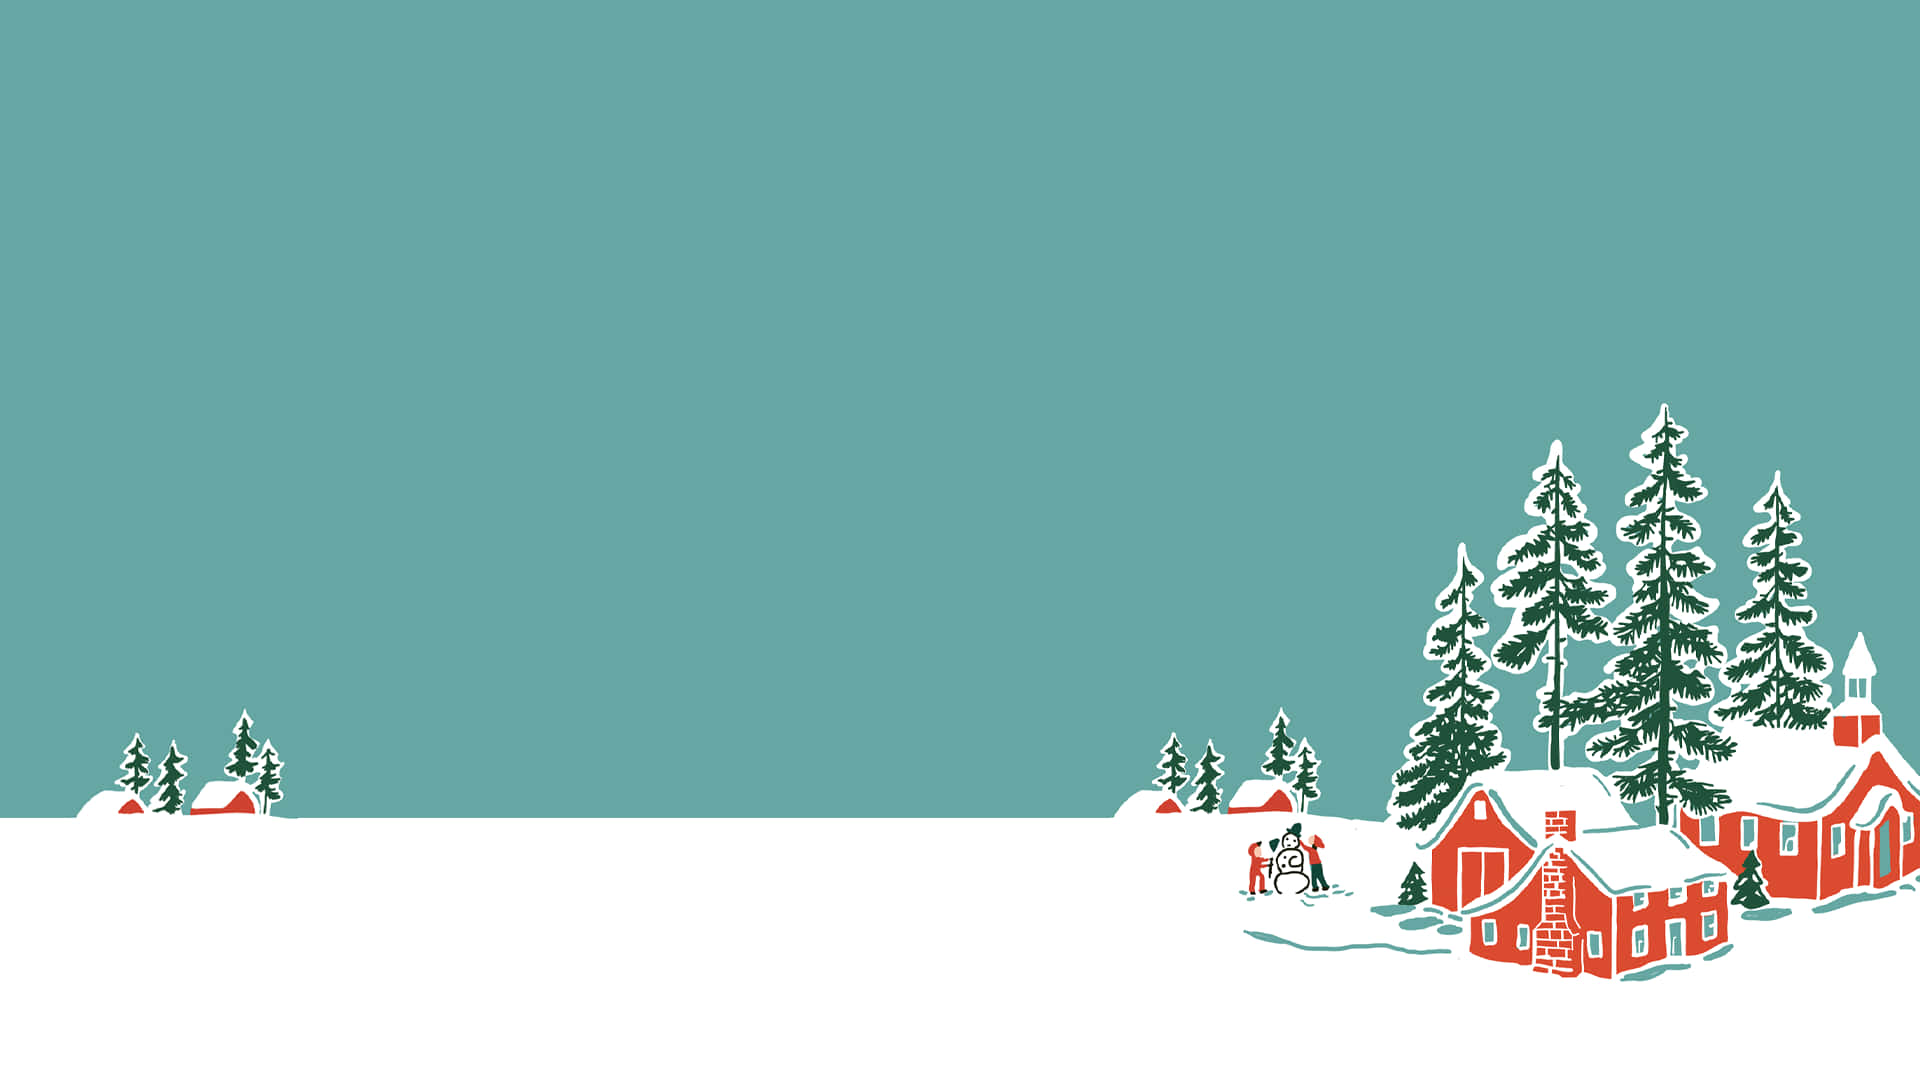 A Christmas Scene With A Village And Trees Wallpaper